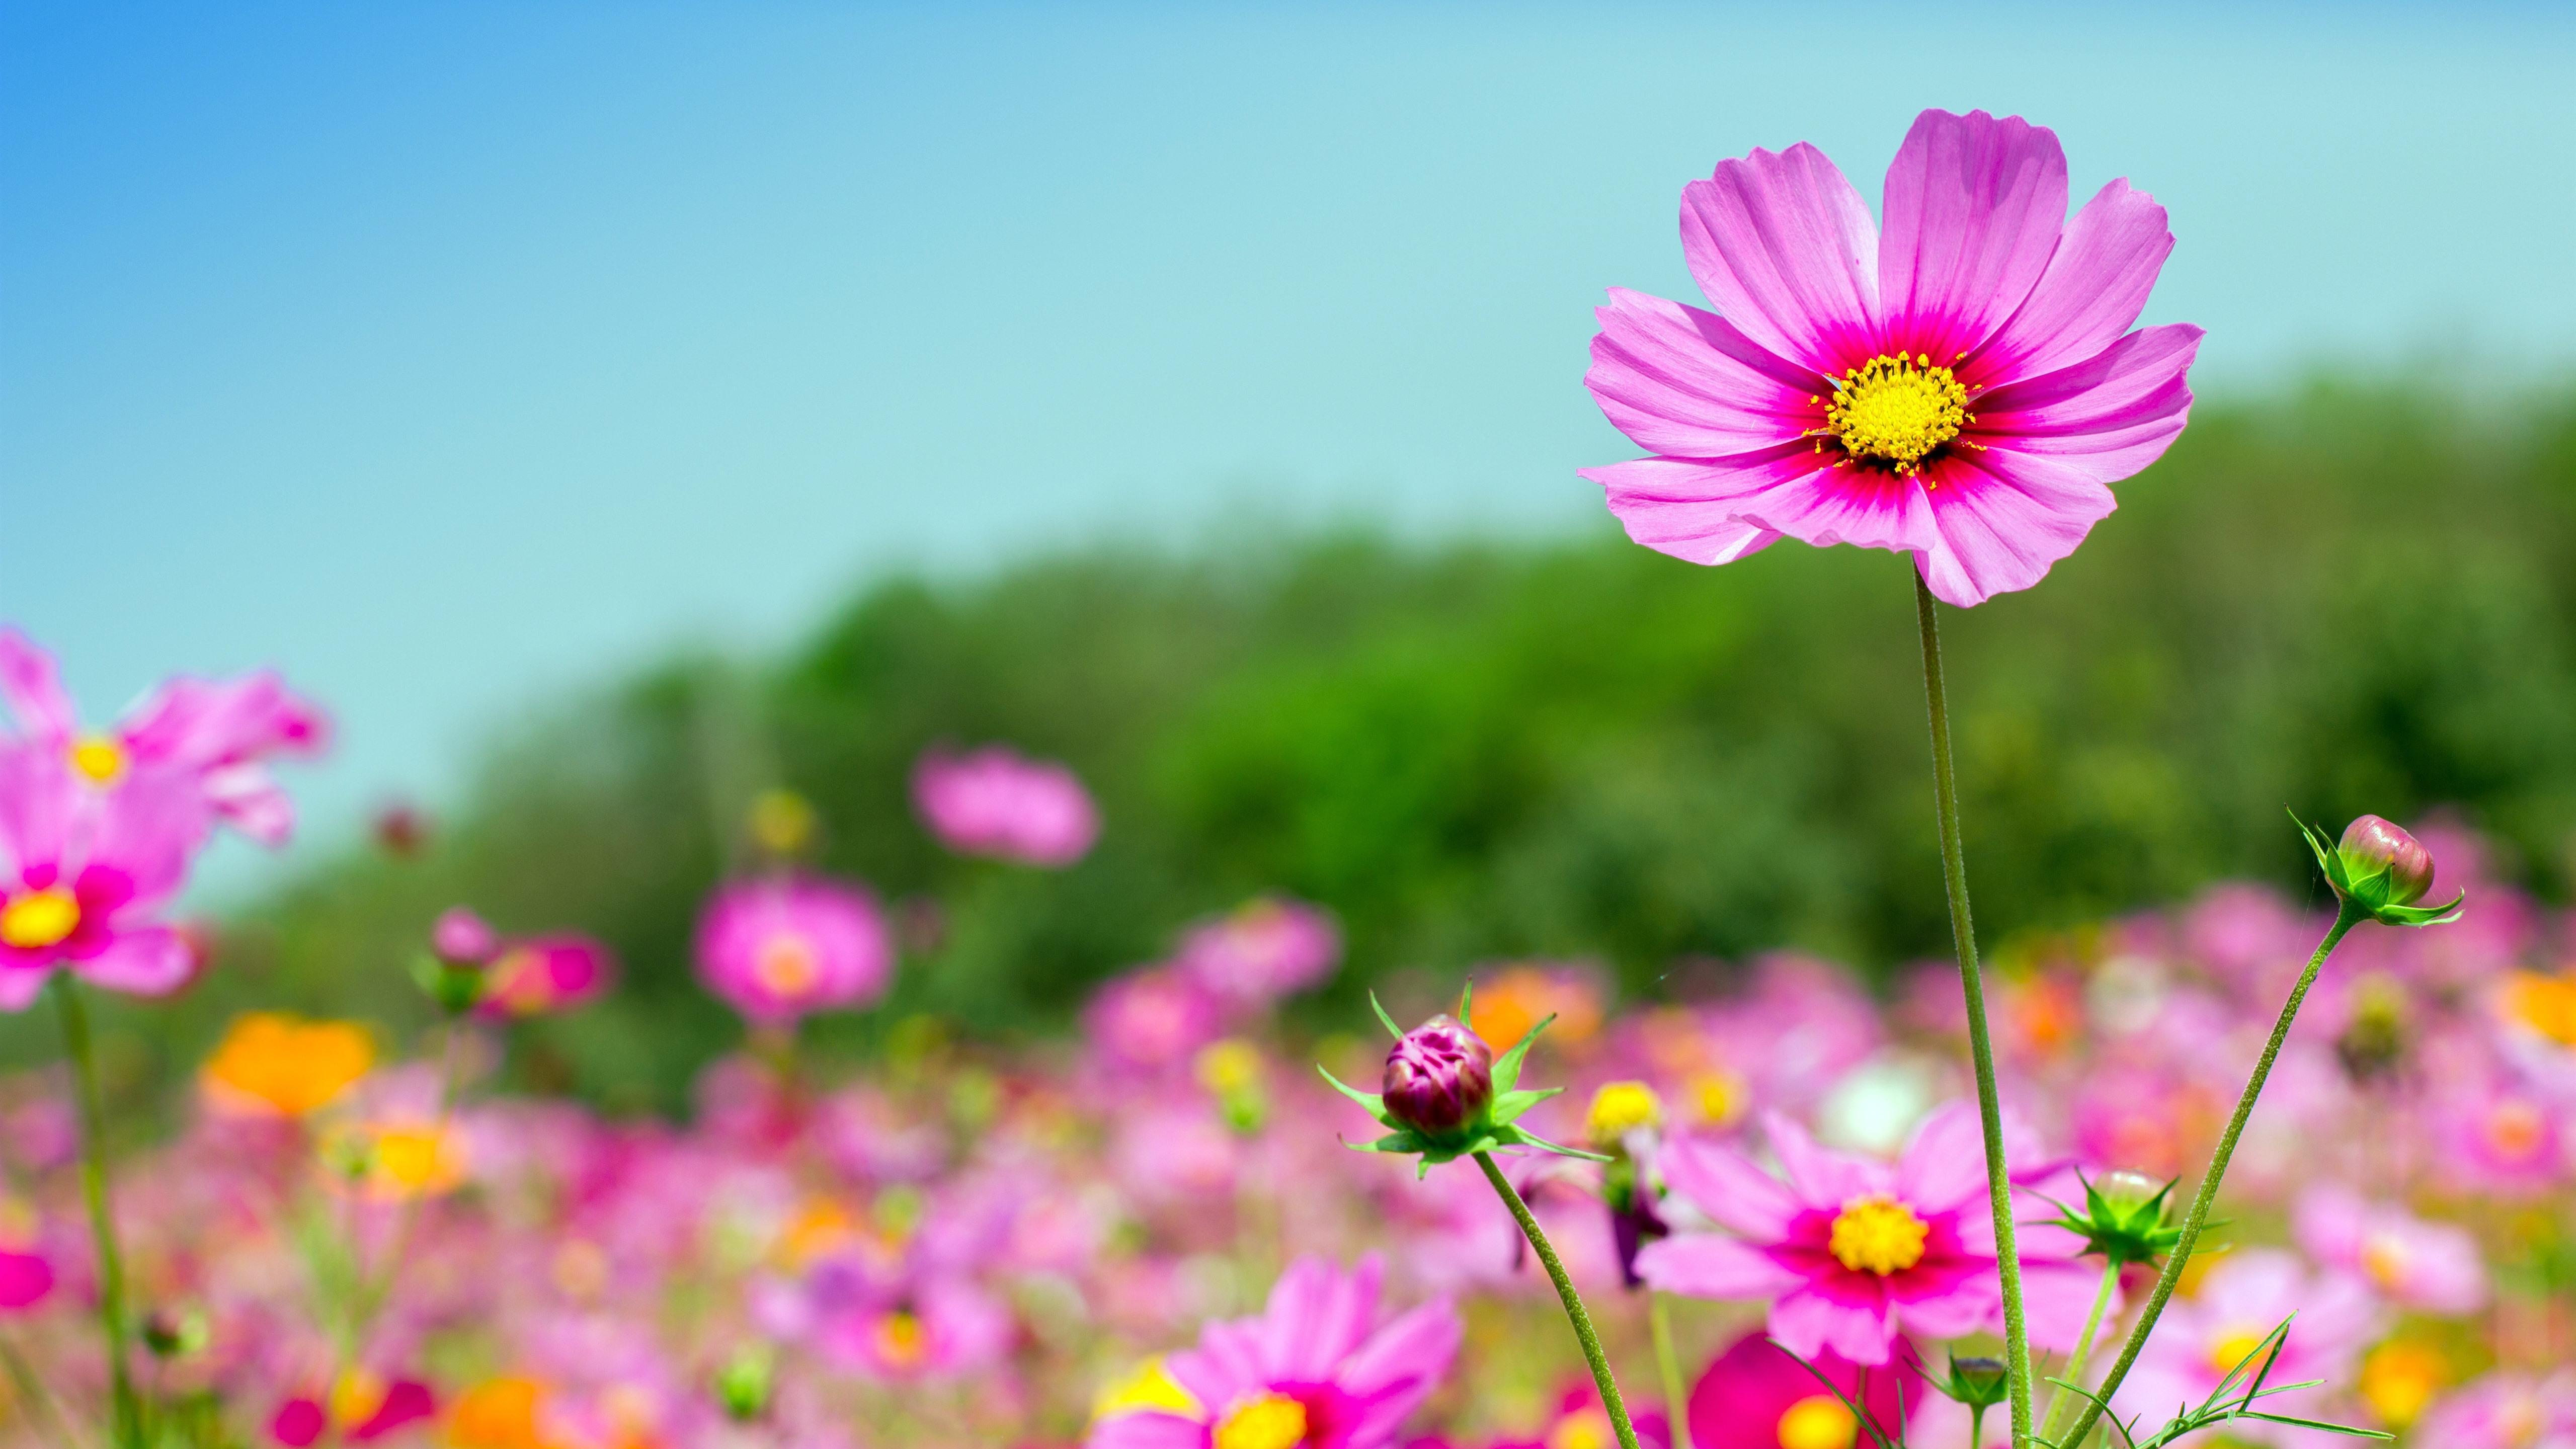 Wallpaper Pink cosmos flowers, summer 5120x2880 UHD 5K Picture, Image